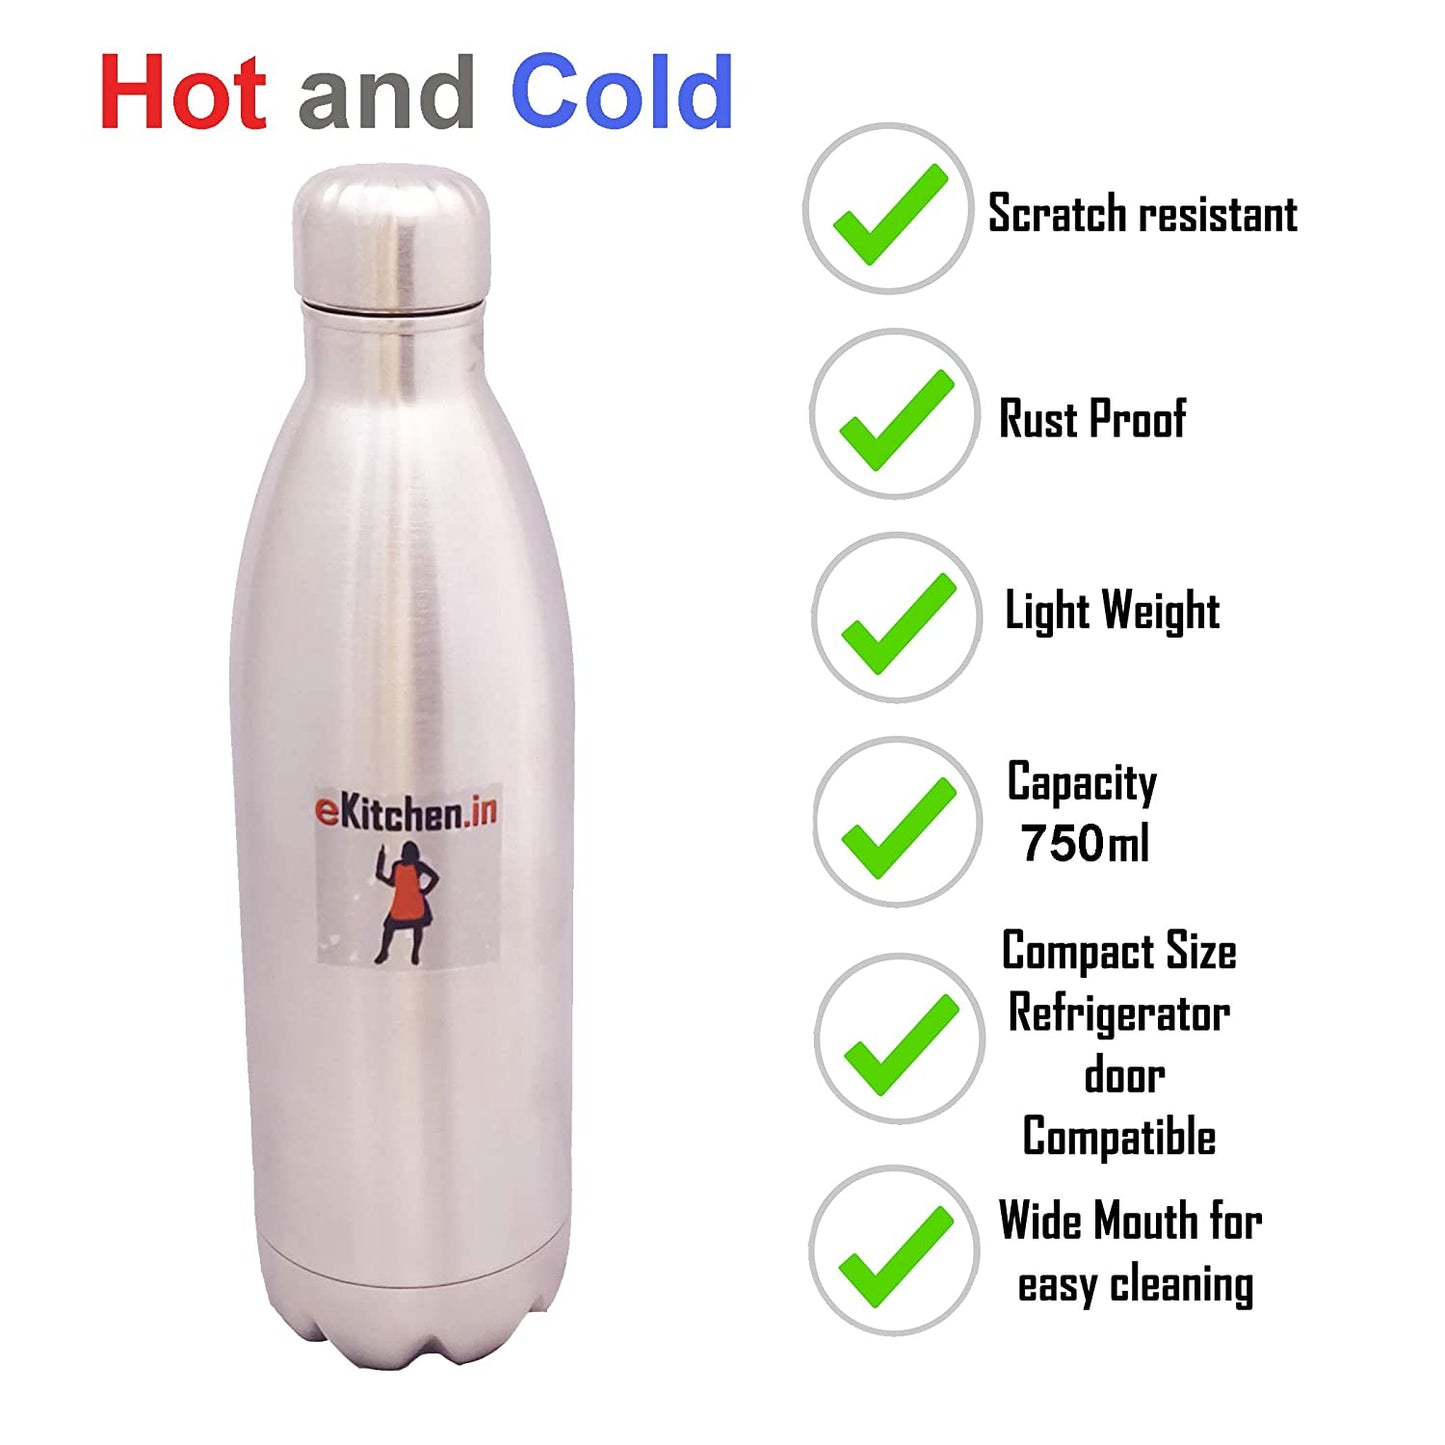 Stainless Steel 750ml Hot and Cold Water Bottle | Flask (Maintains Temperature Upto 8 Hours)